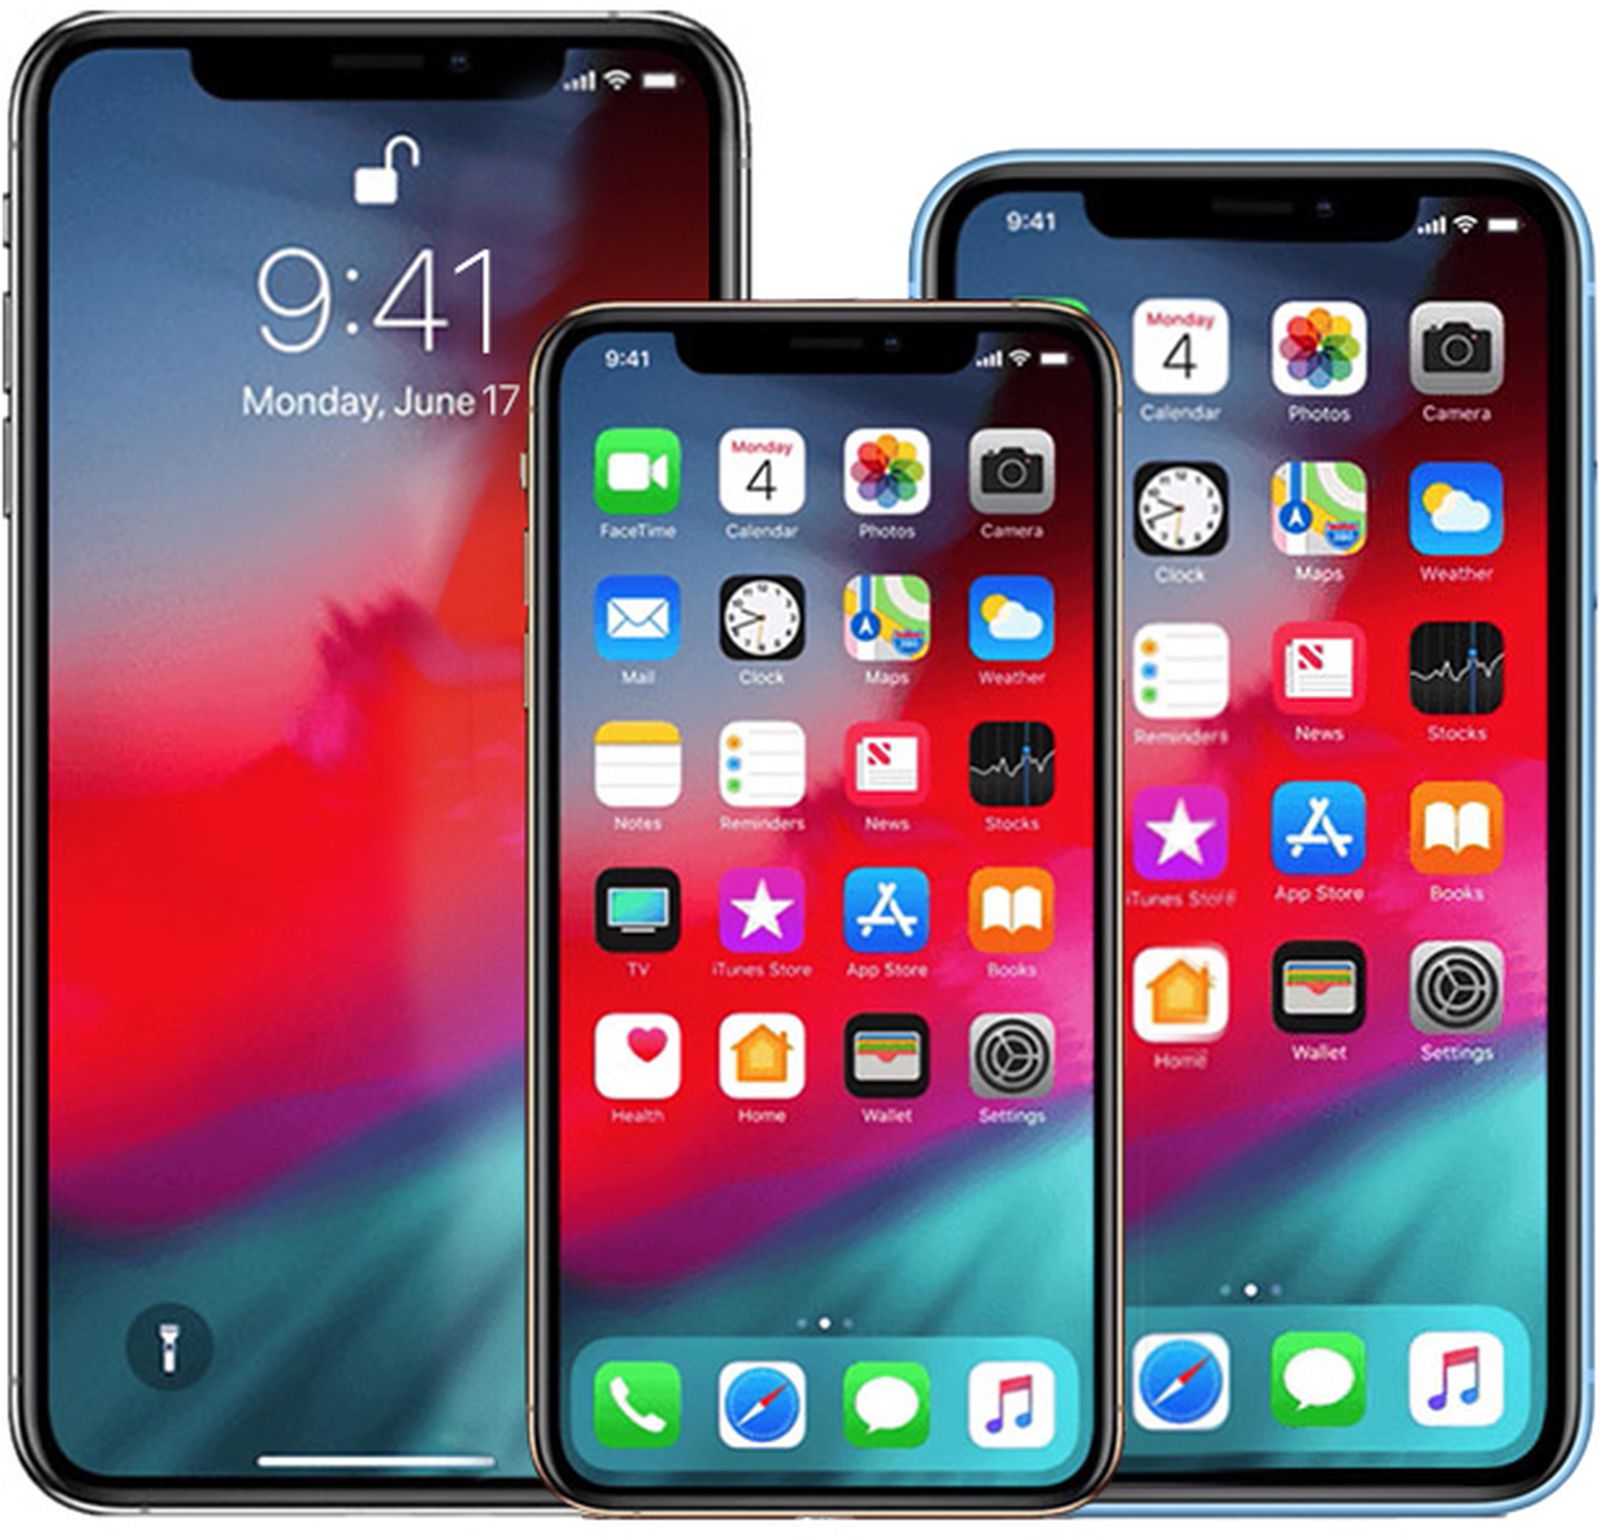 Kuo on 2020 iPhones: 5.4-Inch and 6.7-Inch Models With 5G, 6.1-Inch Model With LTE, All With OLED Displays